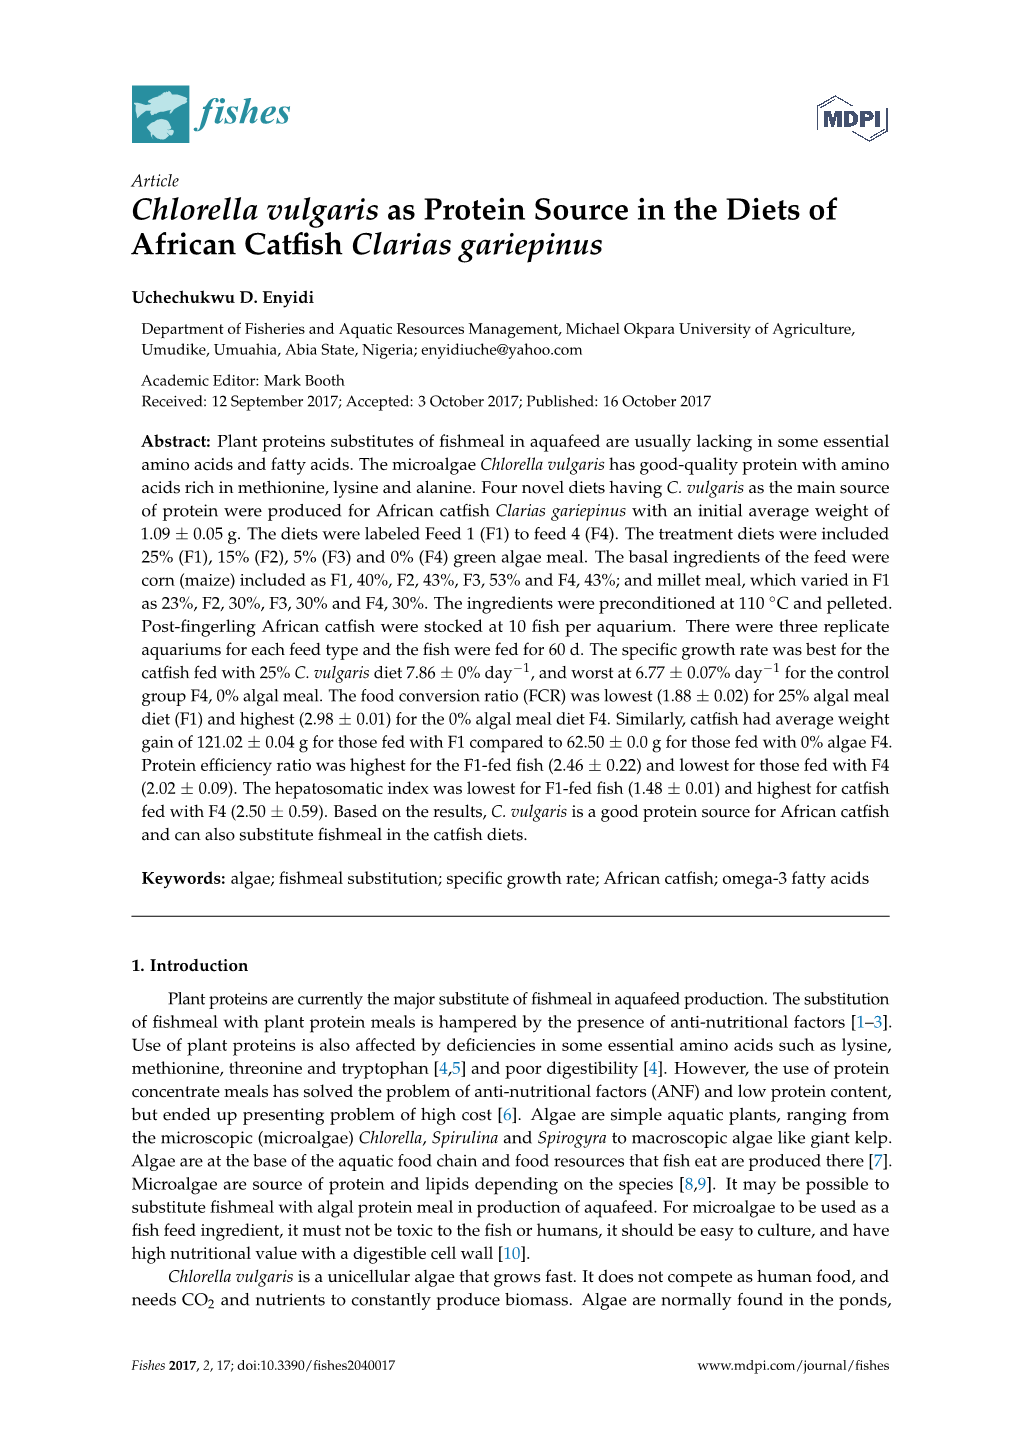 Chlorella Vulgaris As Protein Source in the Diets of African Catfish Clarias